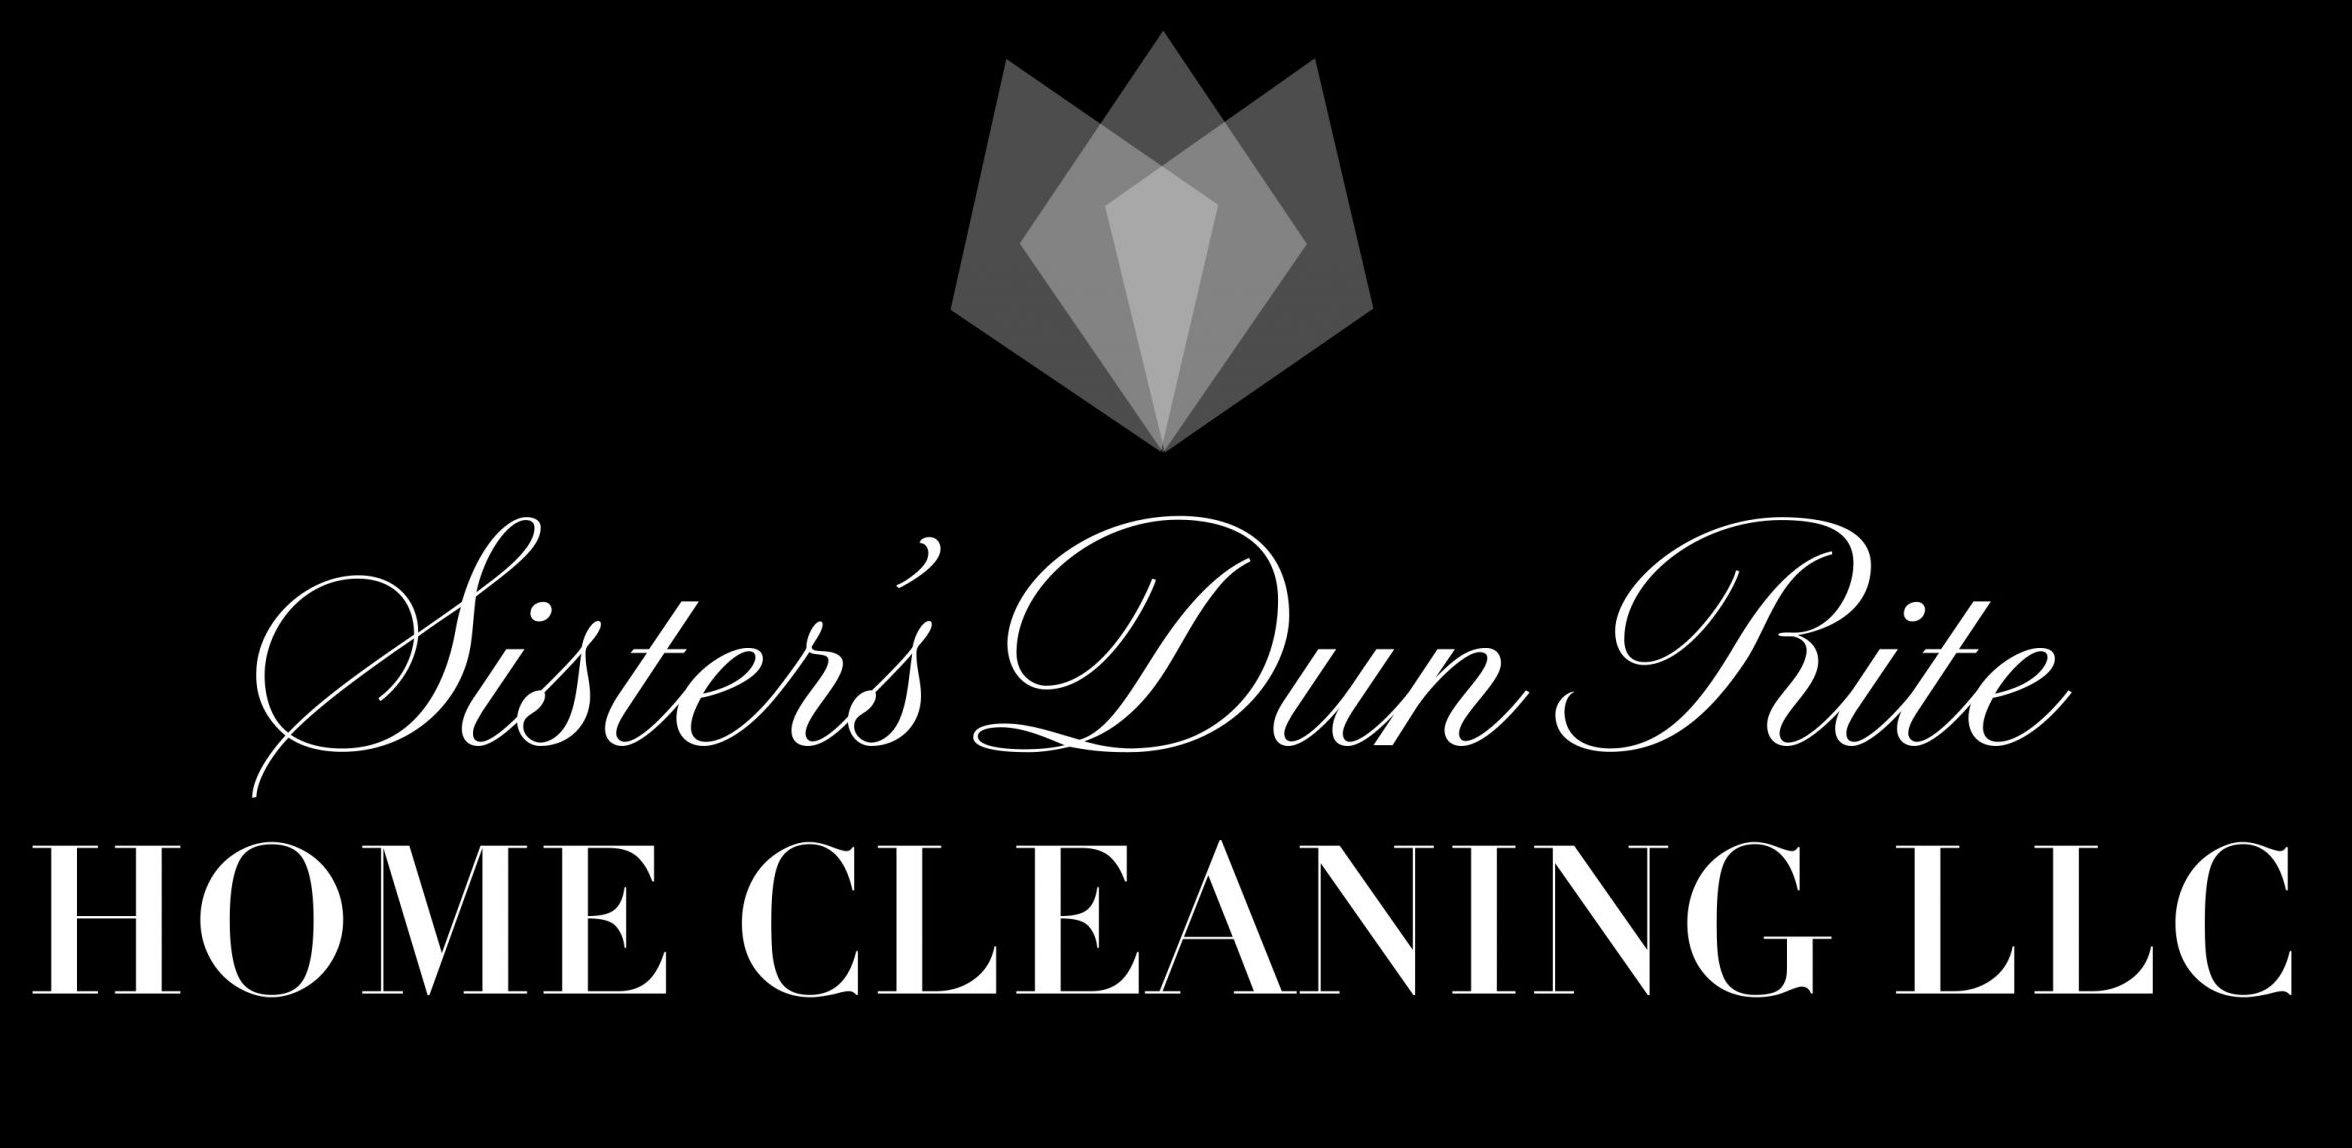 Sister's Dun Rite Home Cleaning LLC